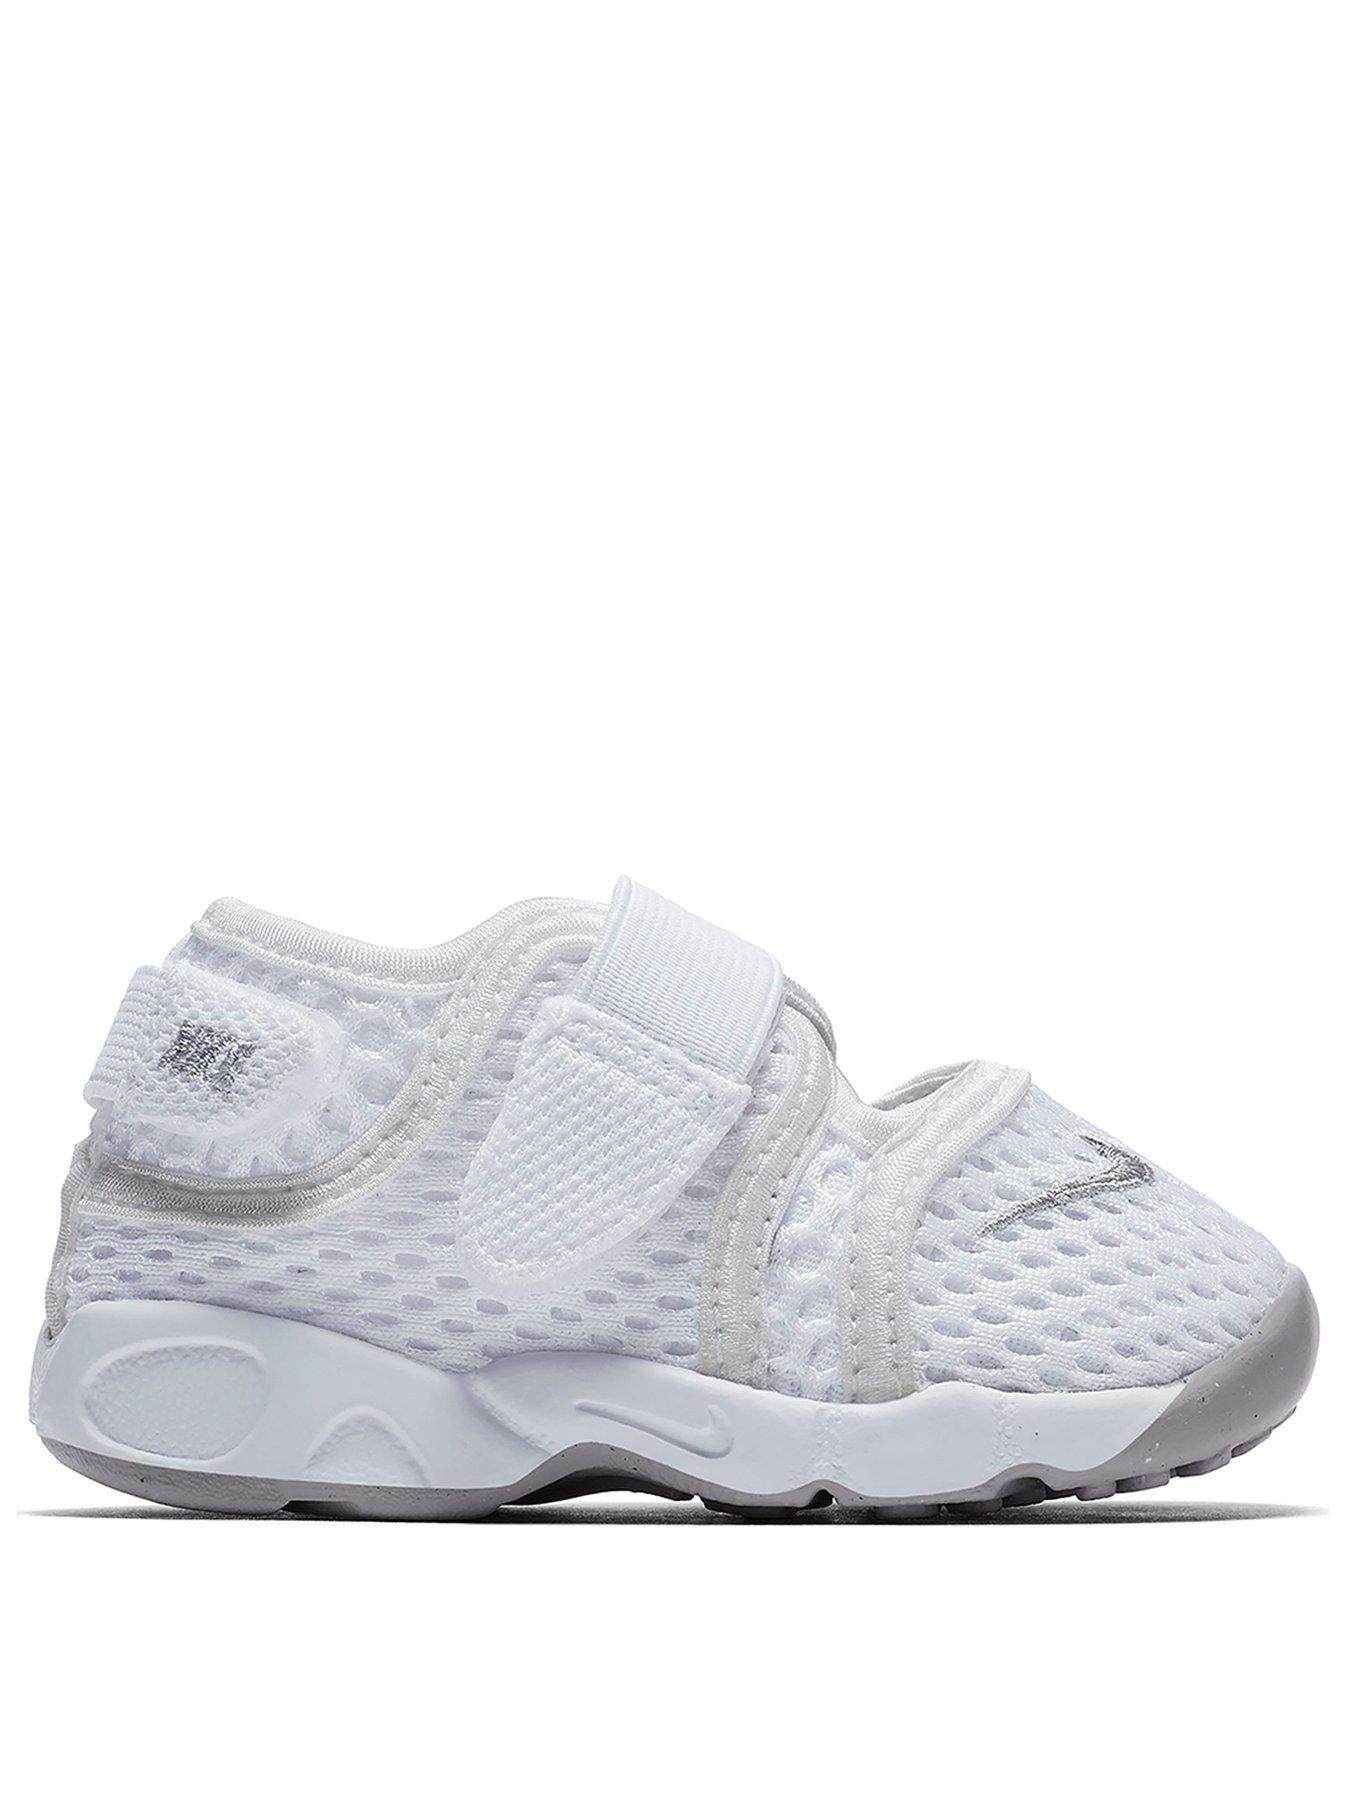 infant trainers size 6.5